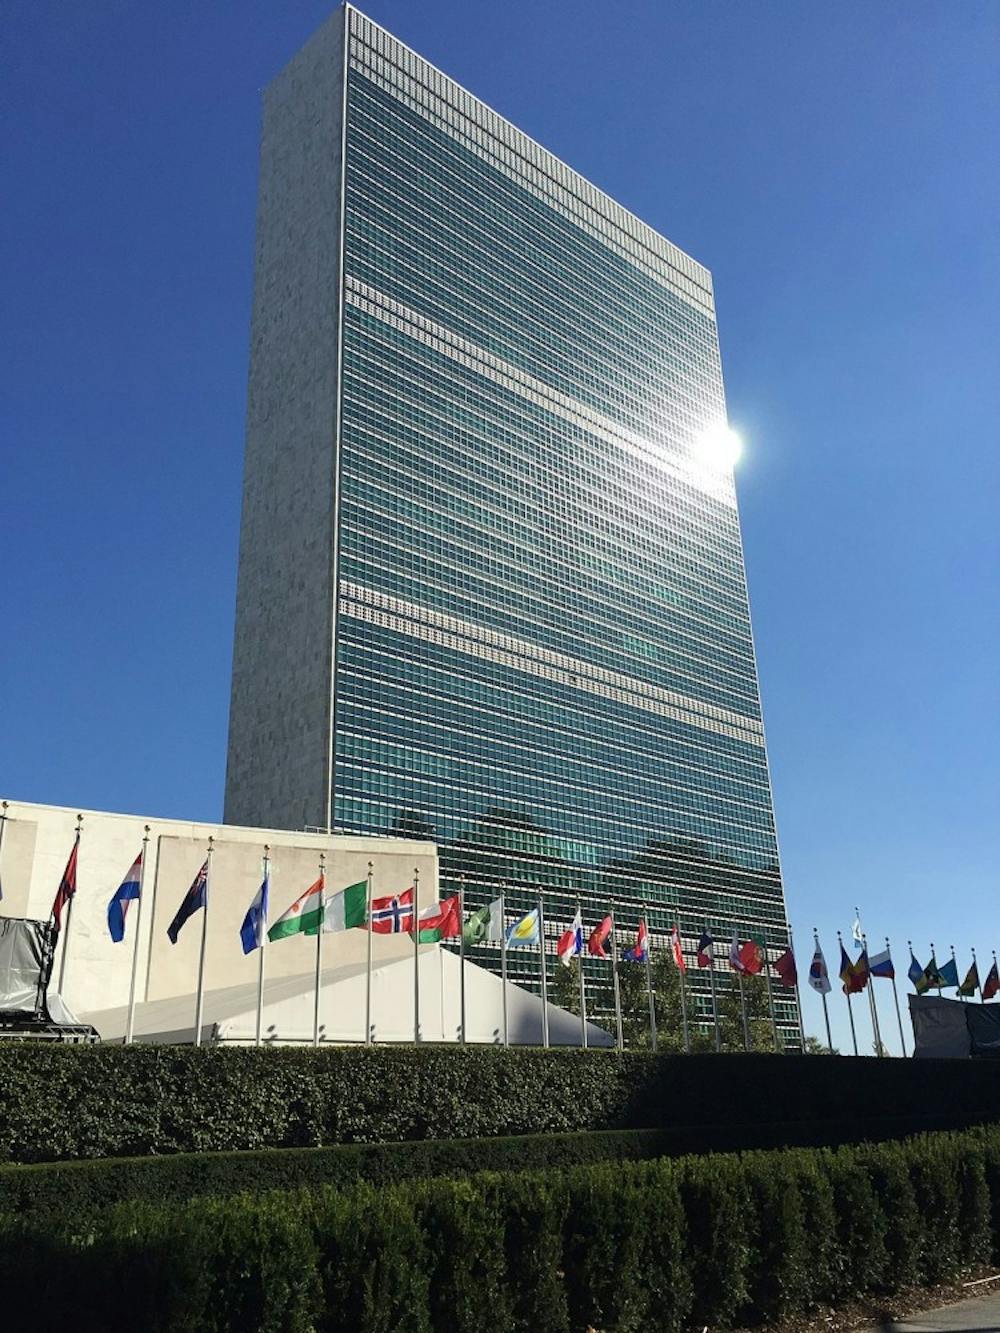 <p>In its 2015 session, the U.N. <a href="https://www.unwatch.org/un-to-adopt-20-resolutions-against-israel-3-on-rest-of-the-world/">passed</a> a whopping total of 20 resolutions condemning Israel, while only passing 3 condemning resolutions against other member nations.</p>